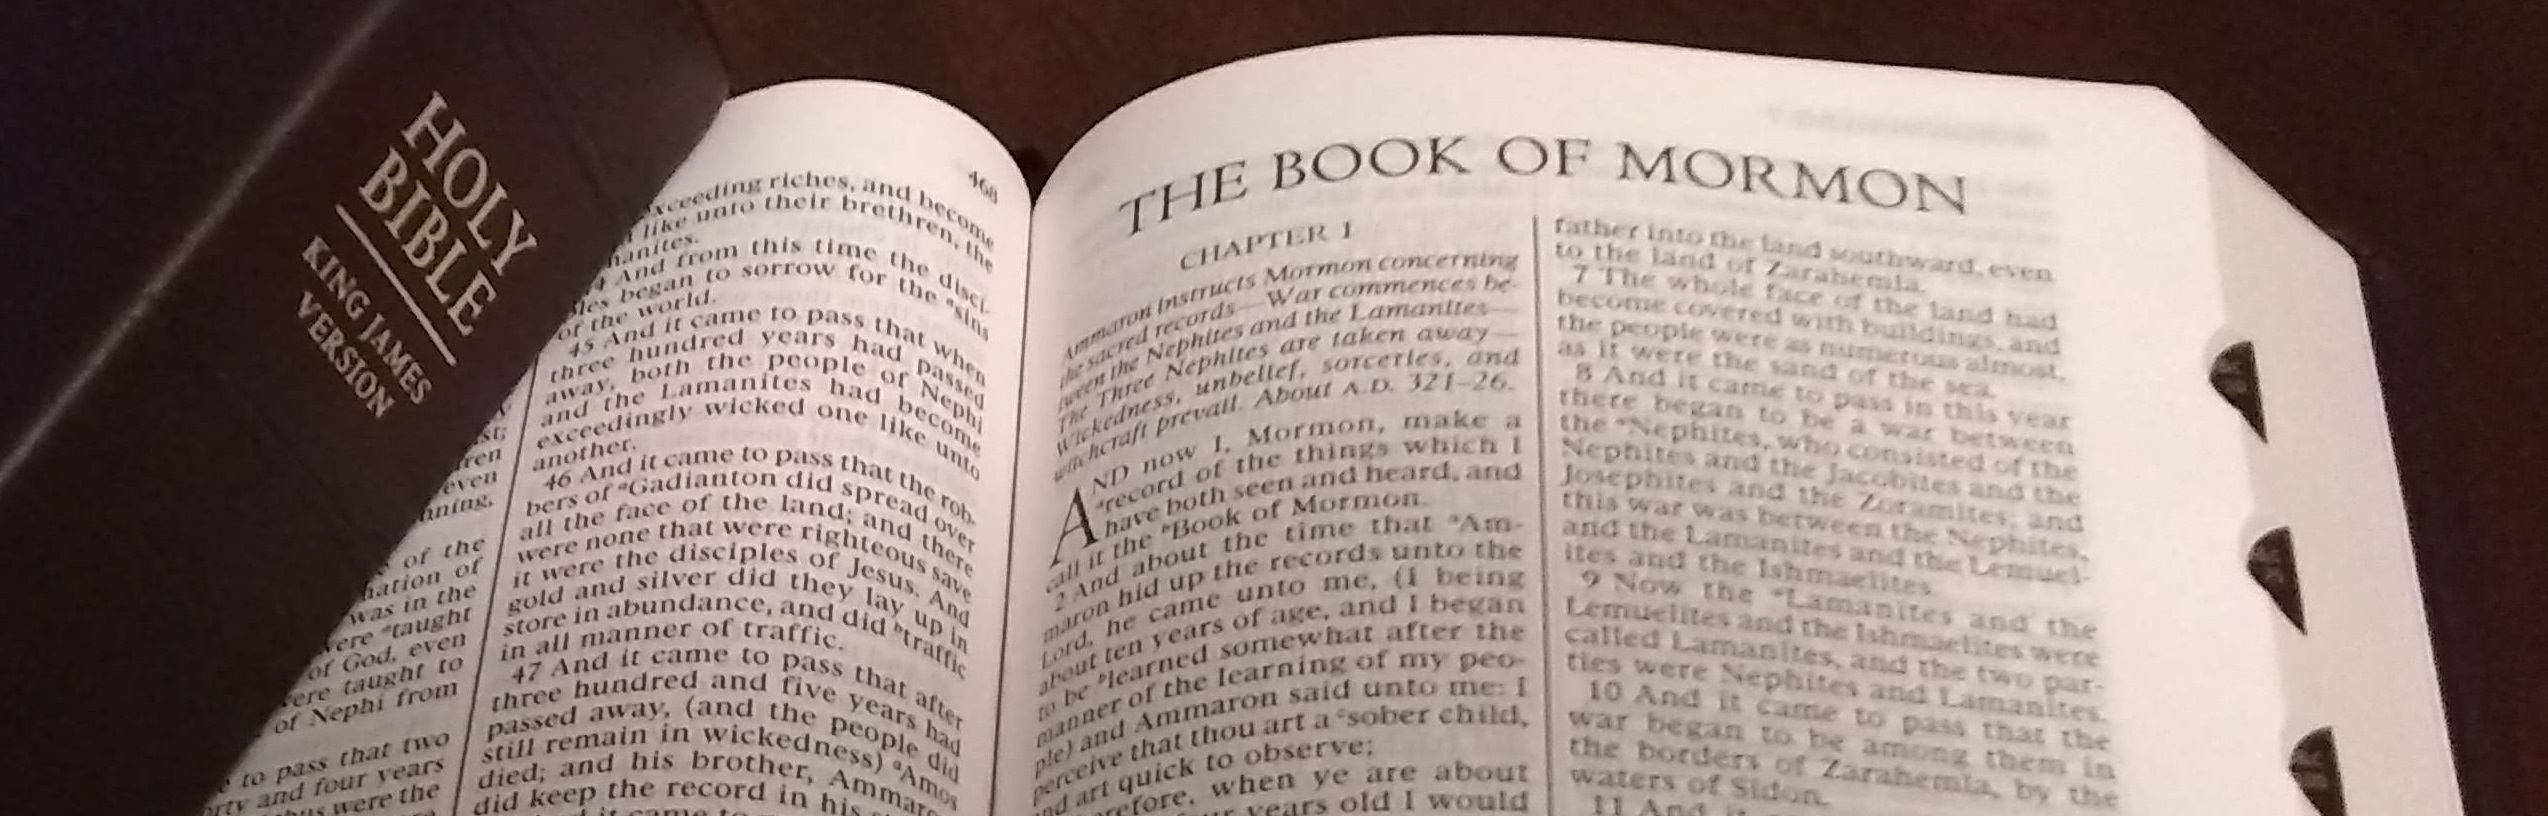 Photo of the Bible and the Book of Mormon